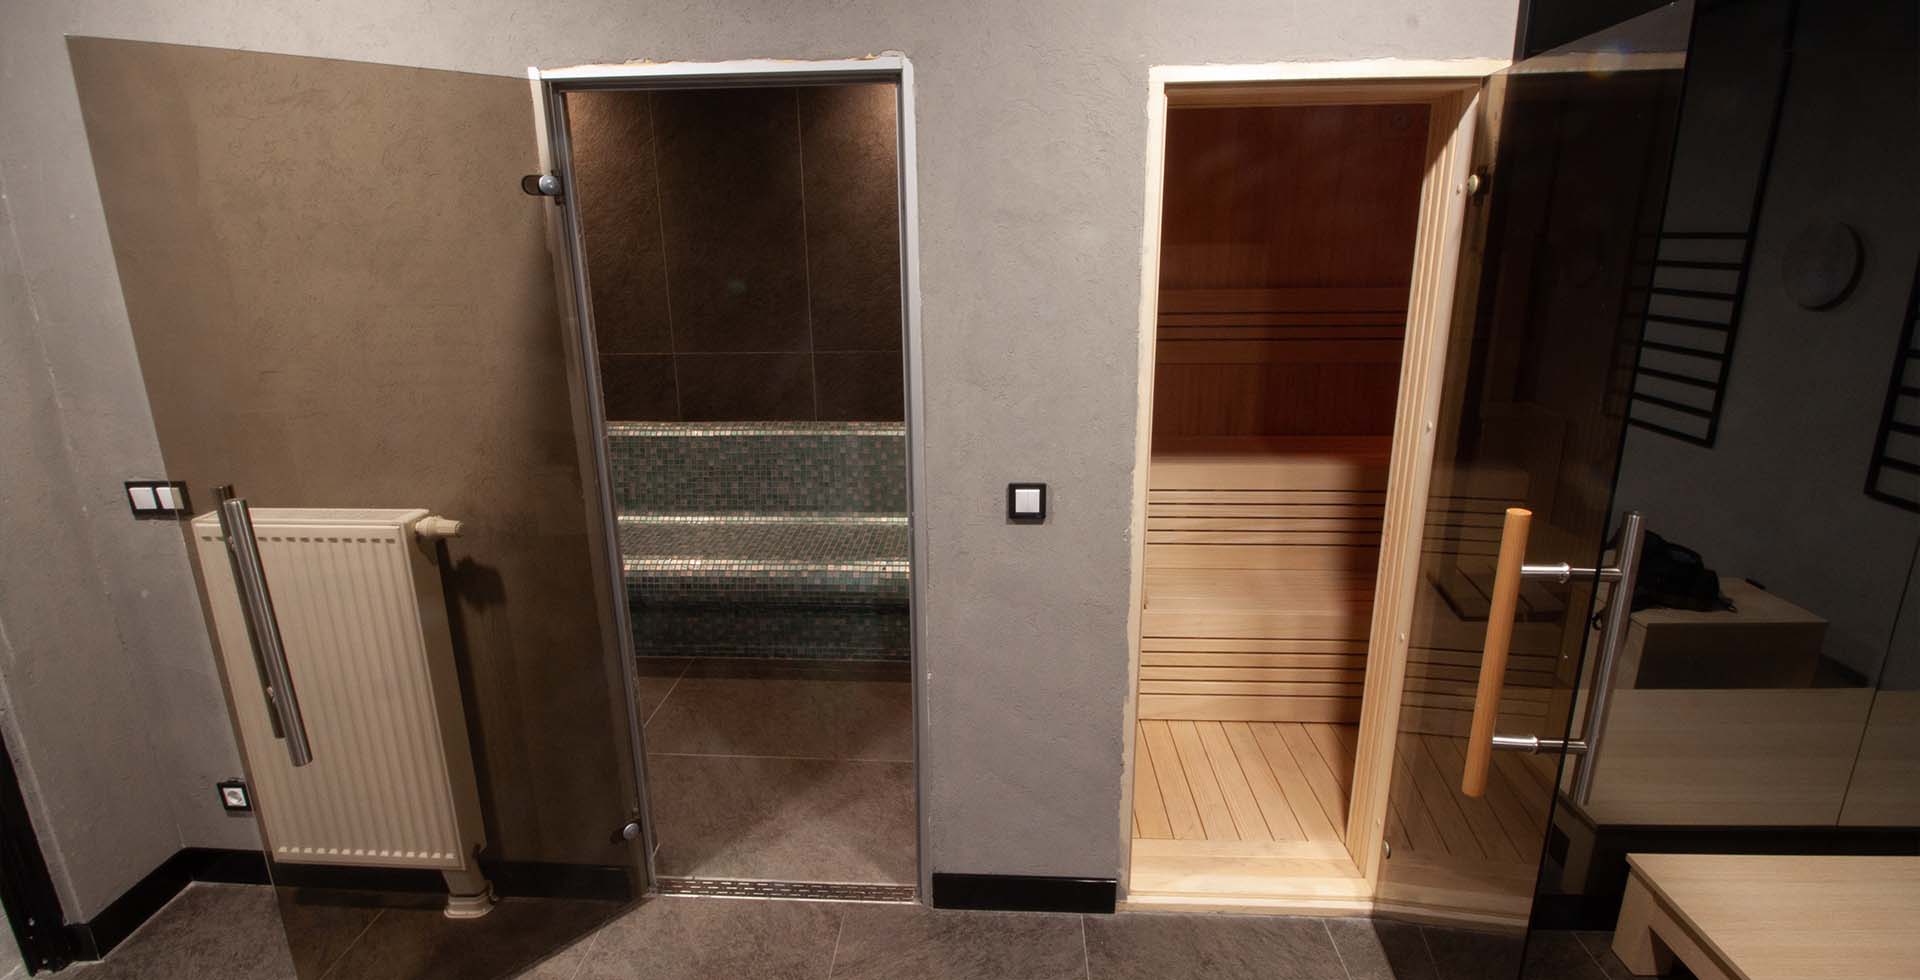 entrance to a steam room and sauna, featuring a welcoming door with frosted glass panels, soft lighting, and a serene ambiance.